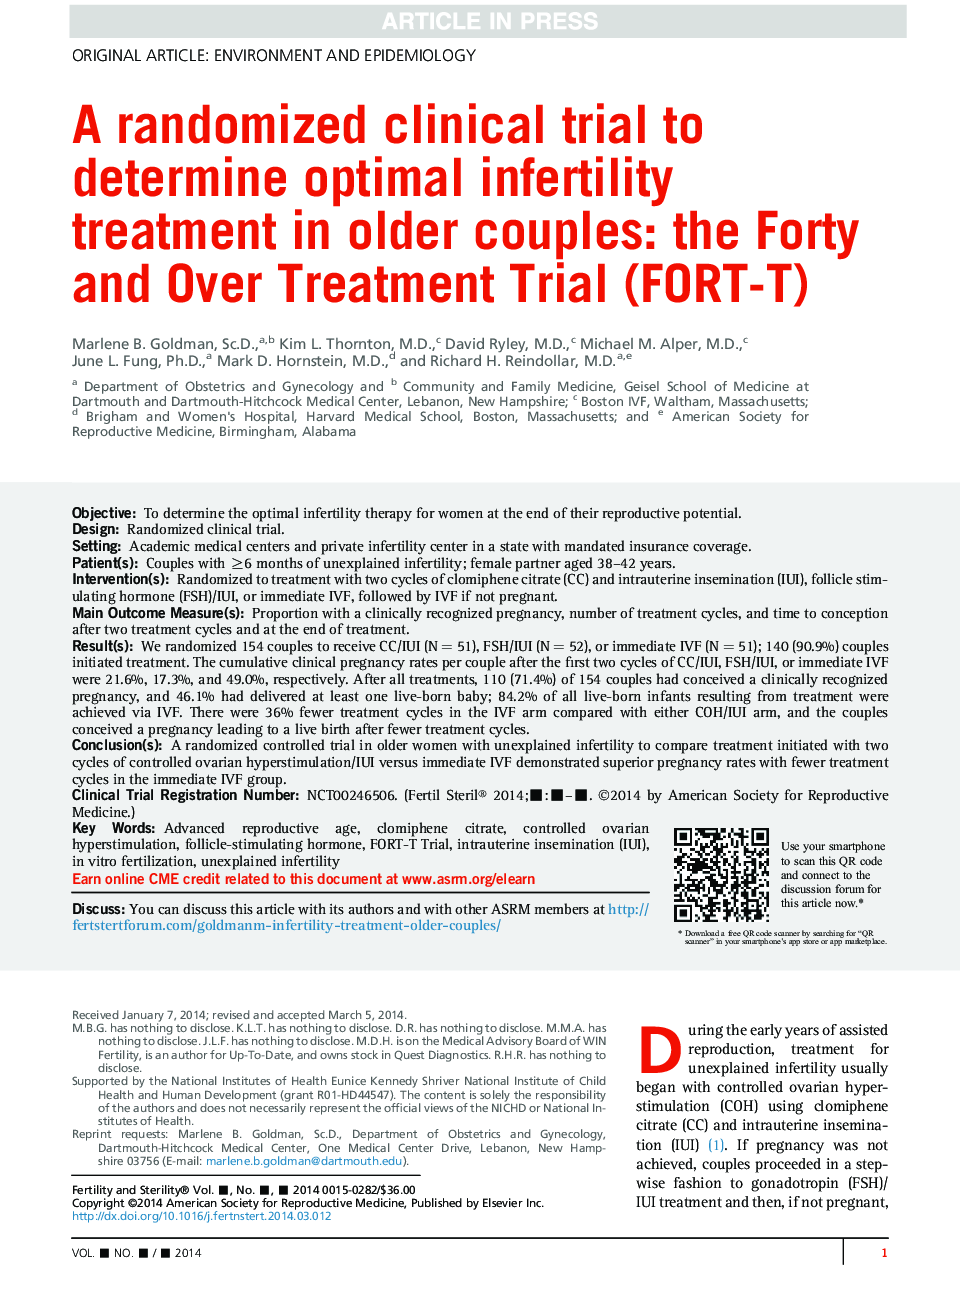 A randomized clinical trial to determine optimal infertility treatment in older couples: the Forty and Over Treatment Trial (FORT-T)